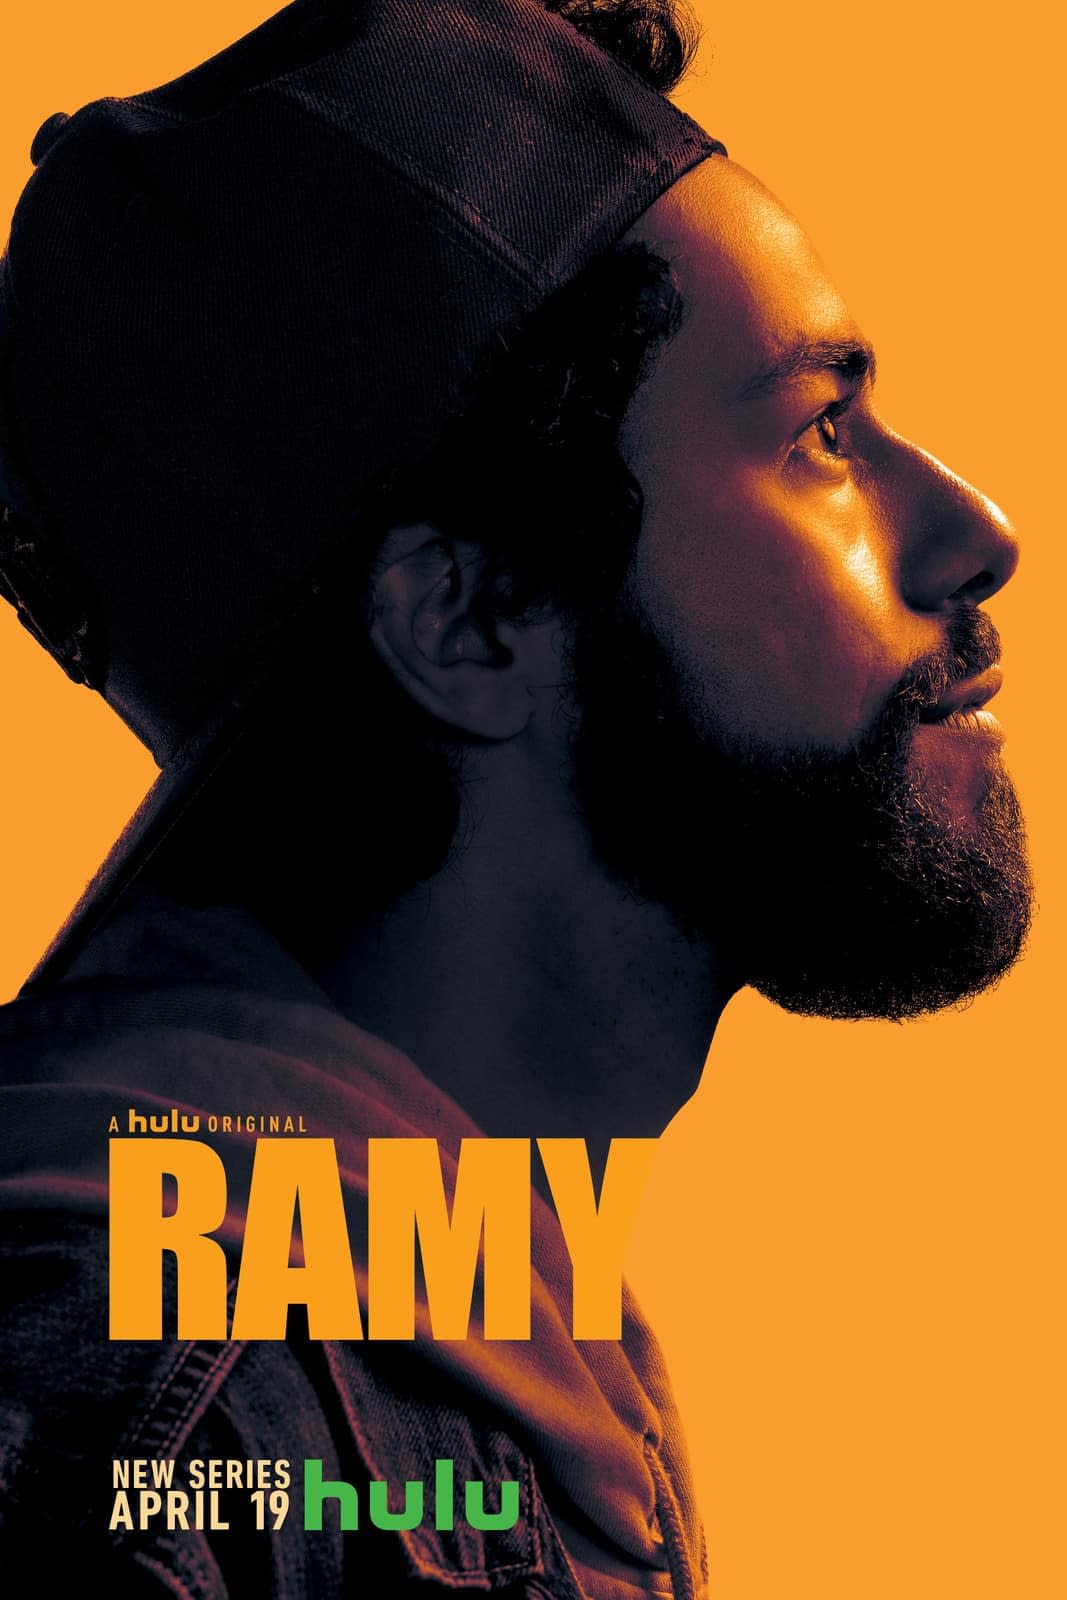 [SXSW 2019] 'Ramy': Hulu Comedy Series Finds Ramy Youssef Just Trying to Be Good (TRAILER)